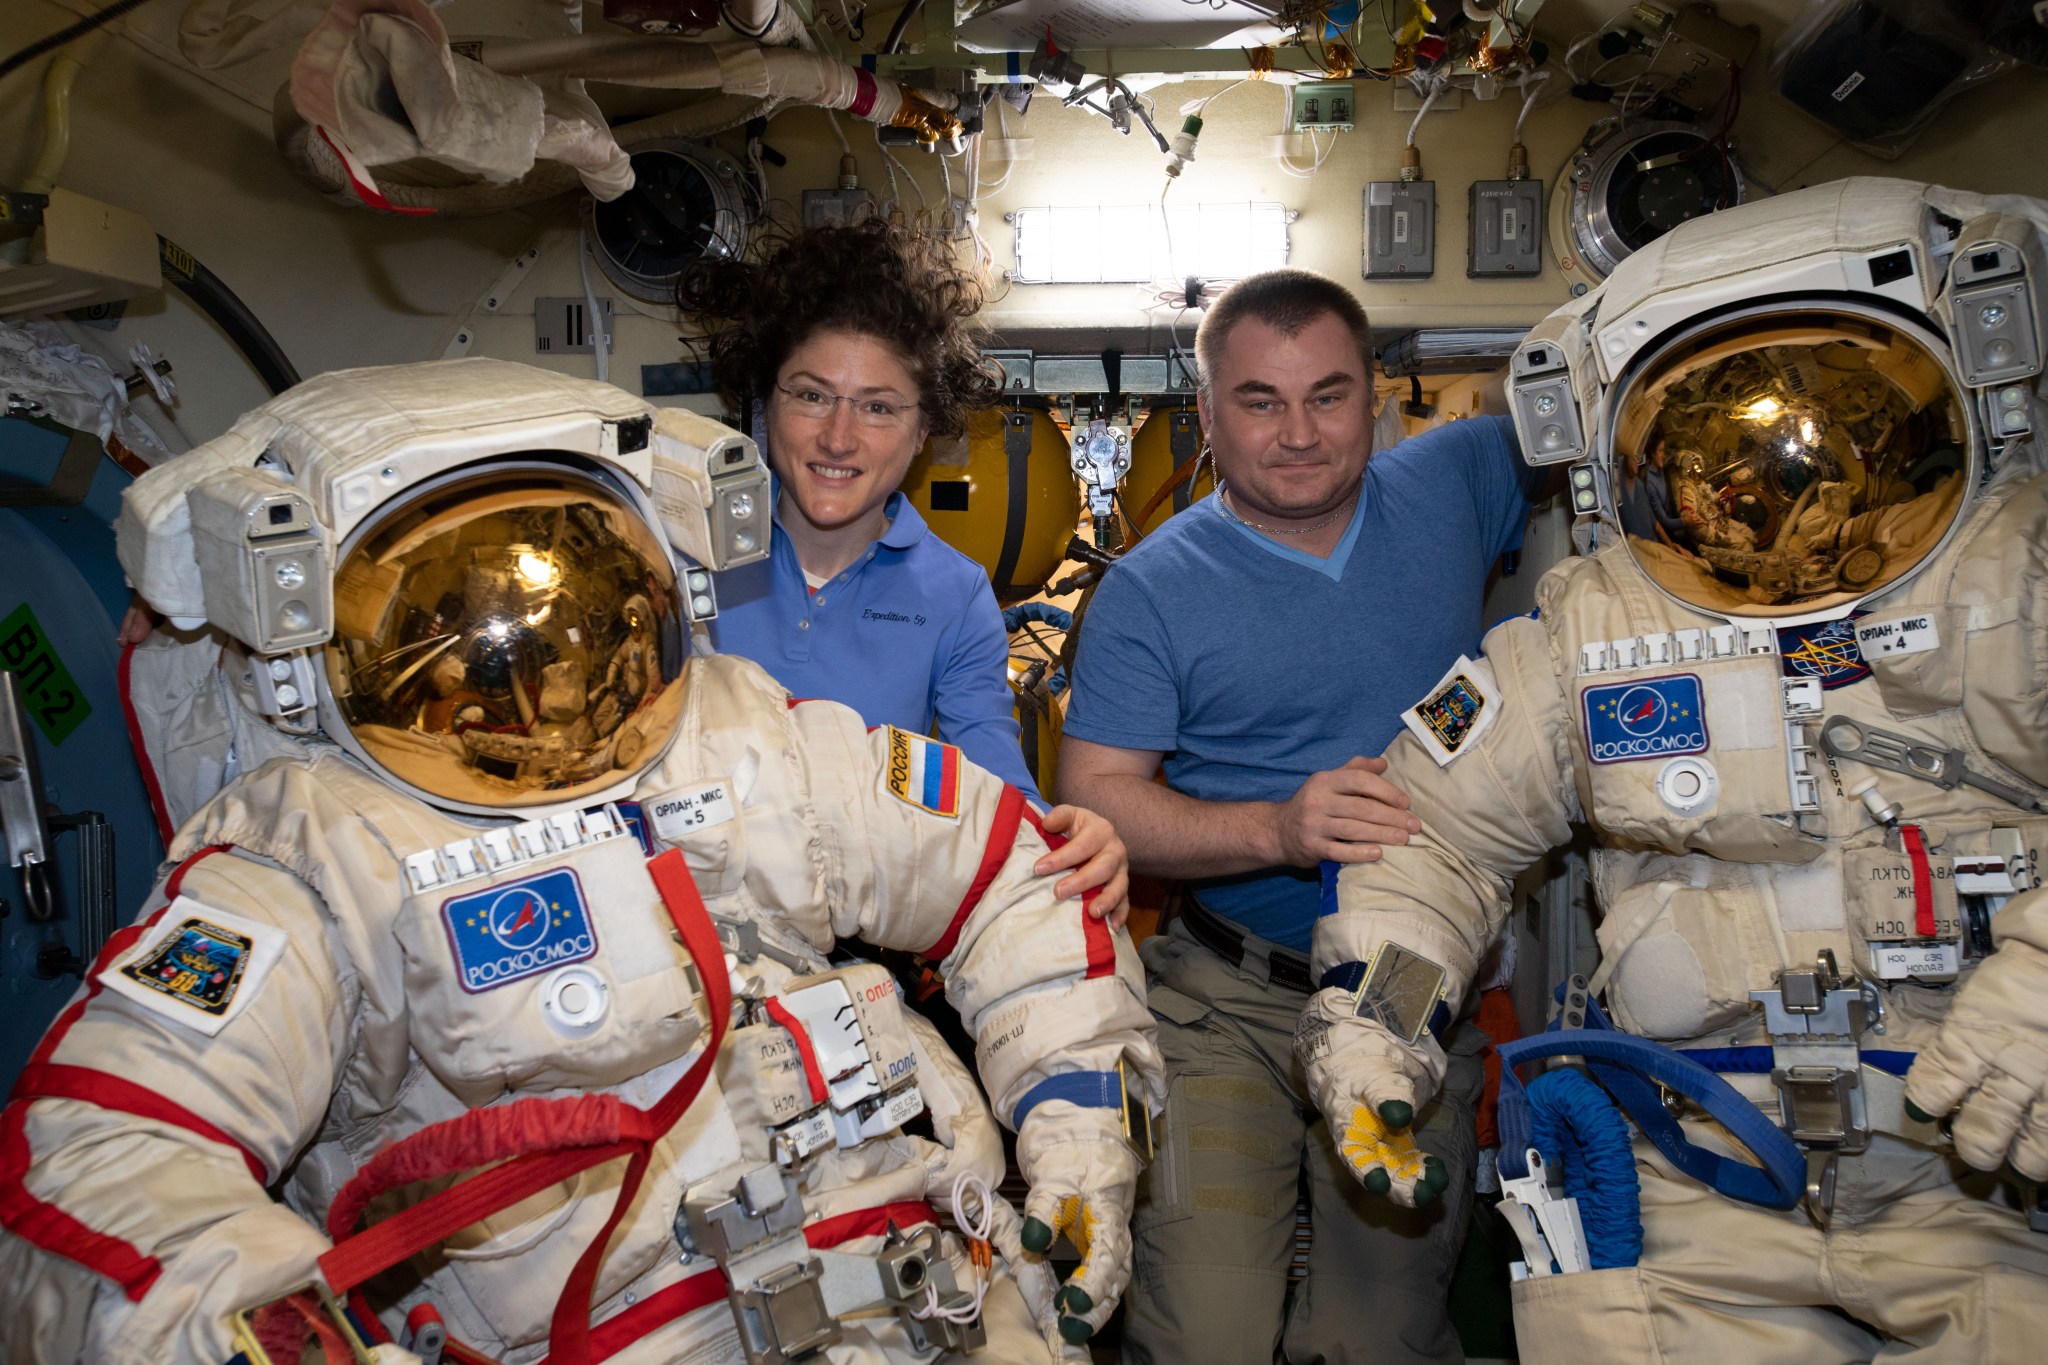 Expedition 59 Flight Engineers Christina Koch of NASA and Alexey Ovchinin of Roscosmos ready a pair of Russian Orlan spacesuits inside the Pirs docking compartment's airlock. Ovchinin and Commander Oleg Kononenko are due to conduct the fourth spacewalk of 2019 for space station maintenance on May 29.